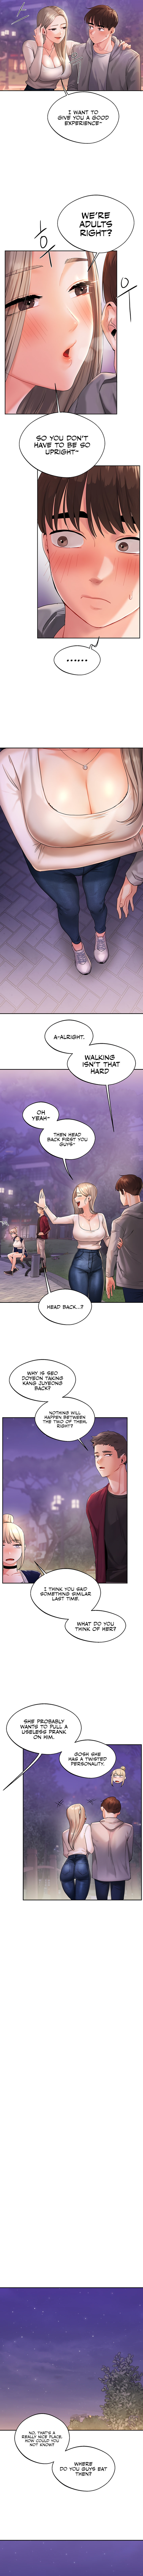 Relationship Reversal - Chapter 2 Page 8